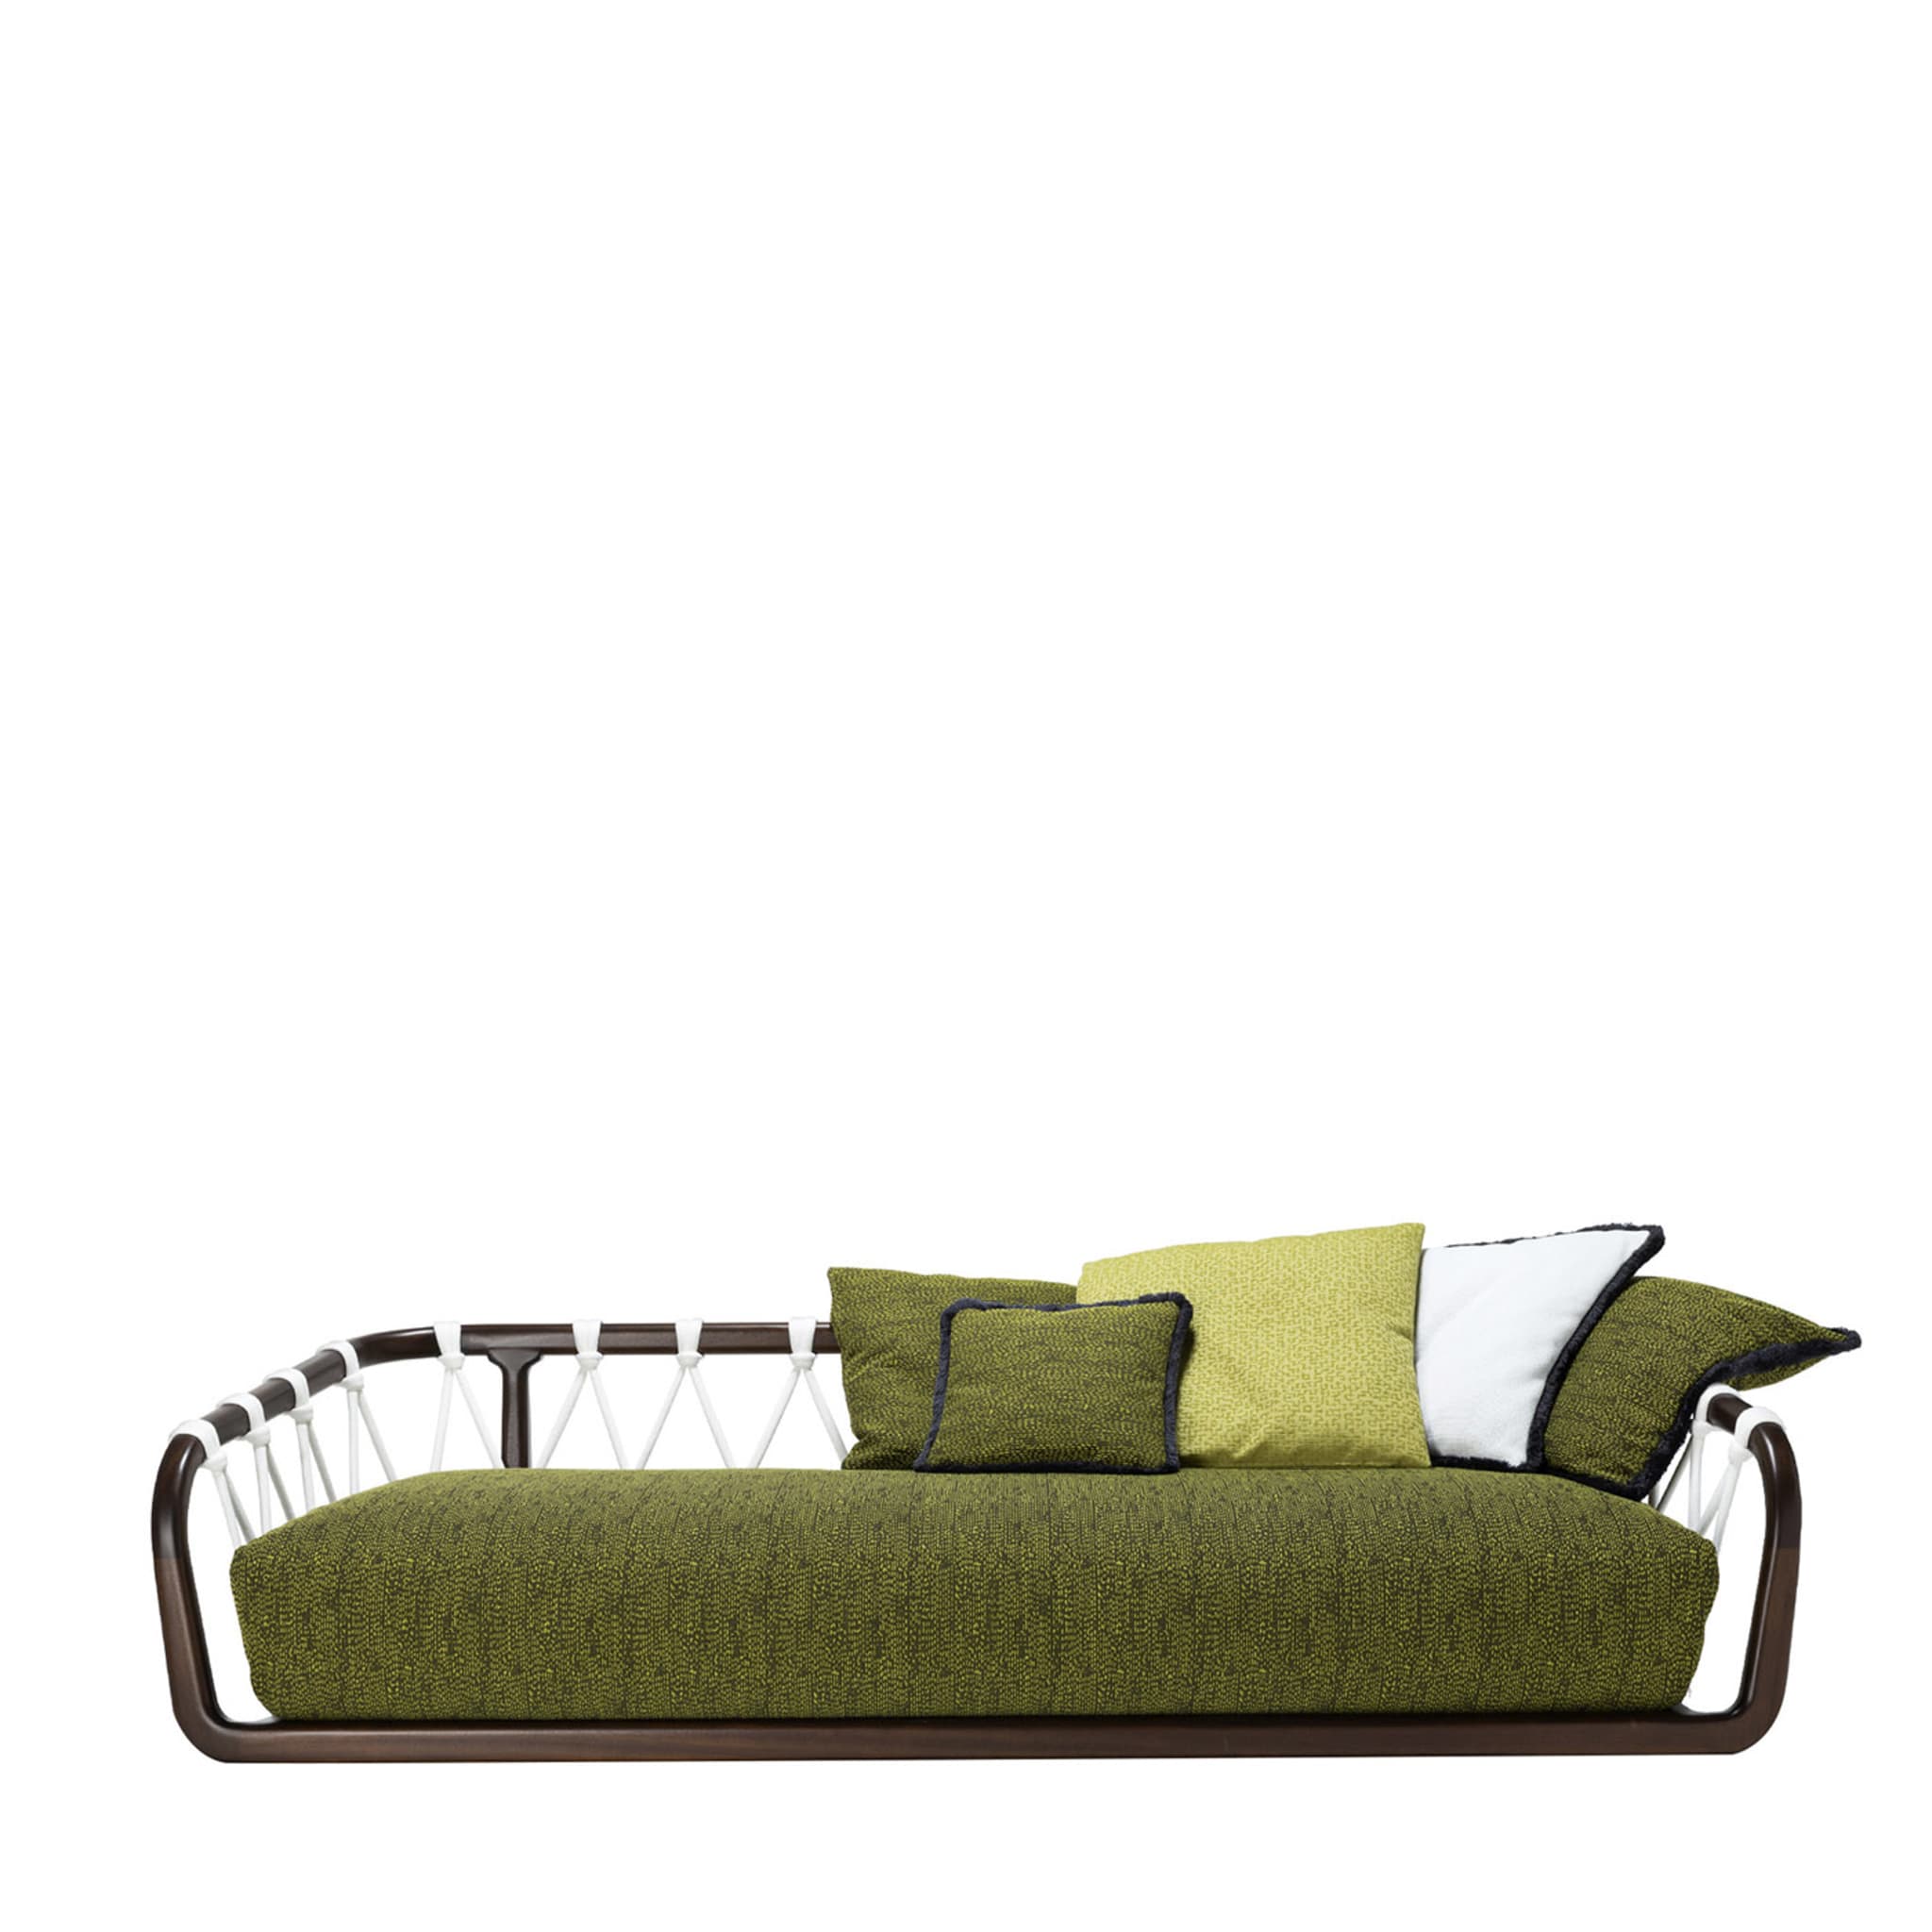 Sunset Basket Large Barrique + Green Sofa by Paola Navone - Main view